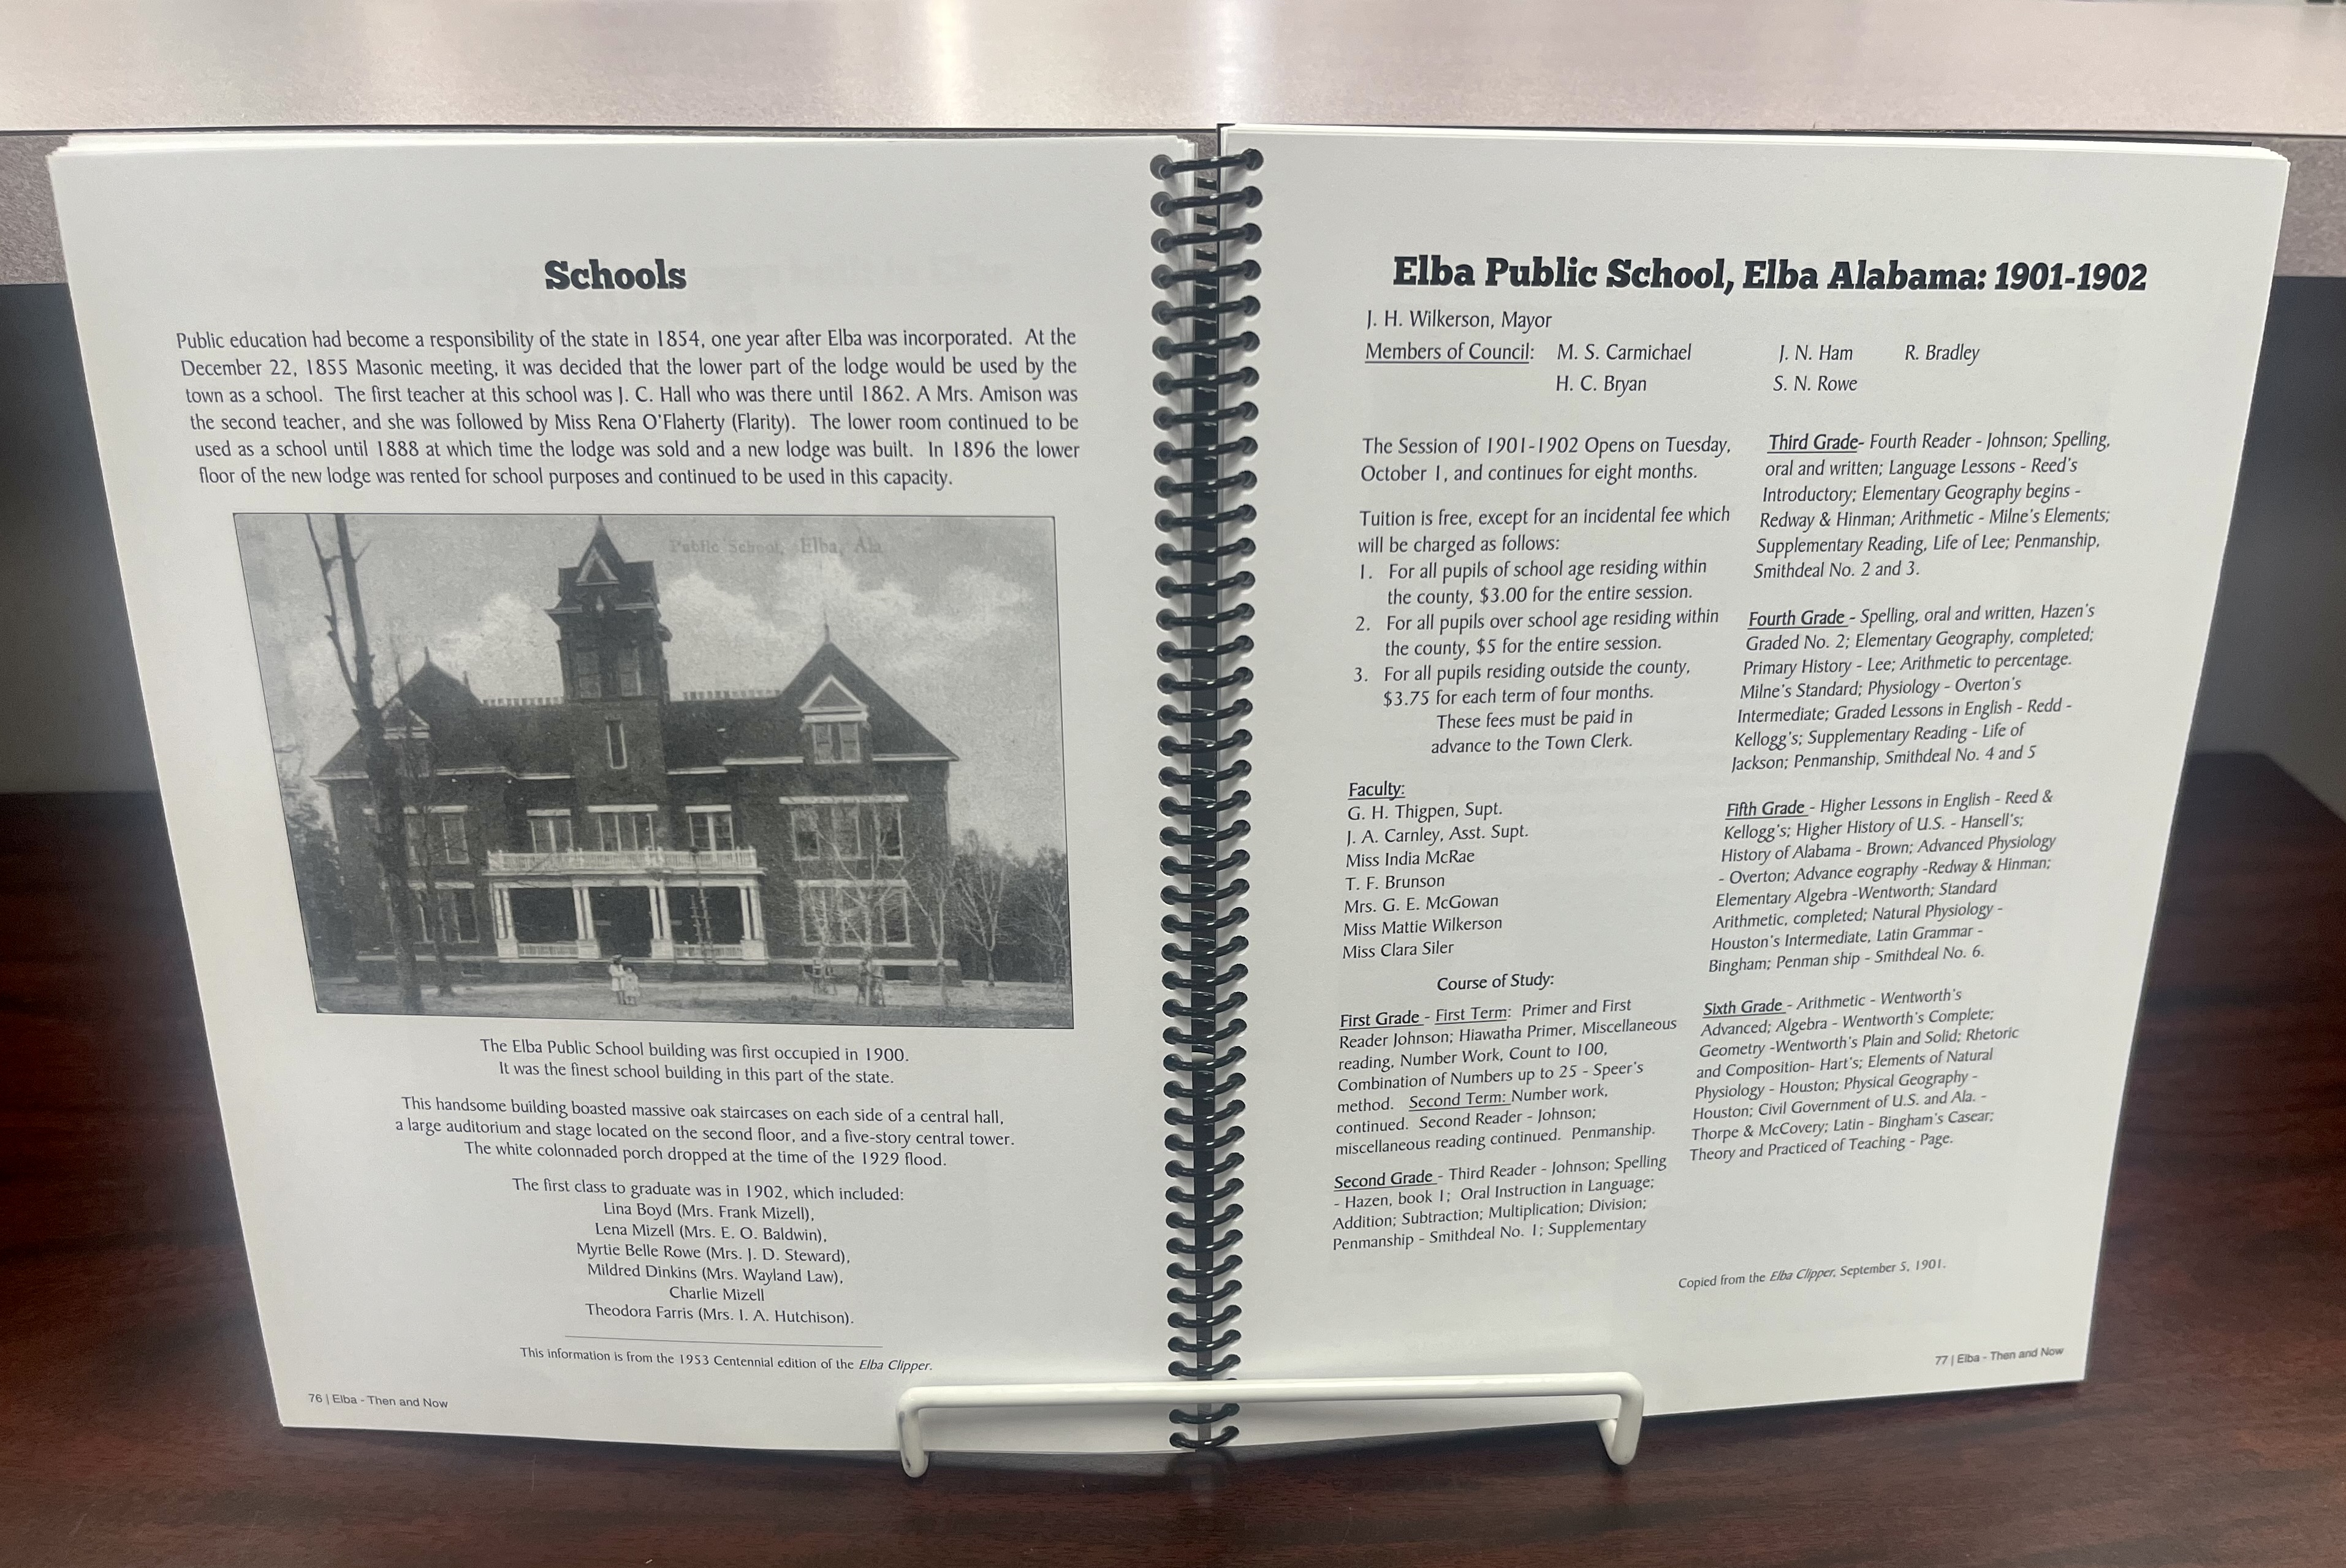 Copies of “Elba: Then and Now, 1853-2013” are now on display at the Elba Public Library.